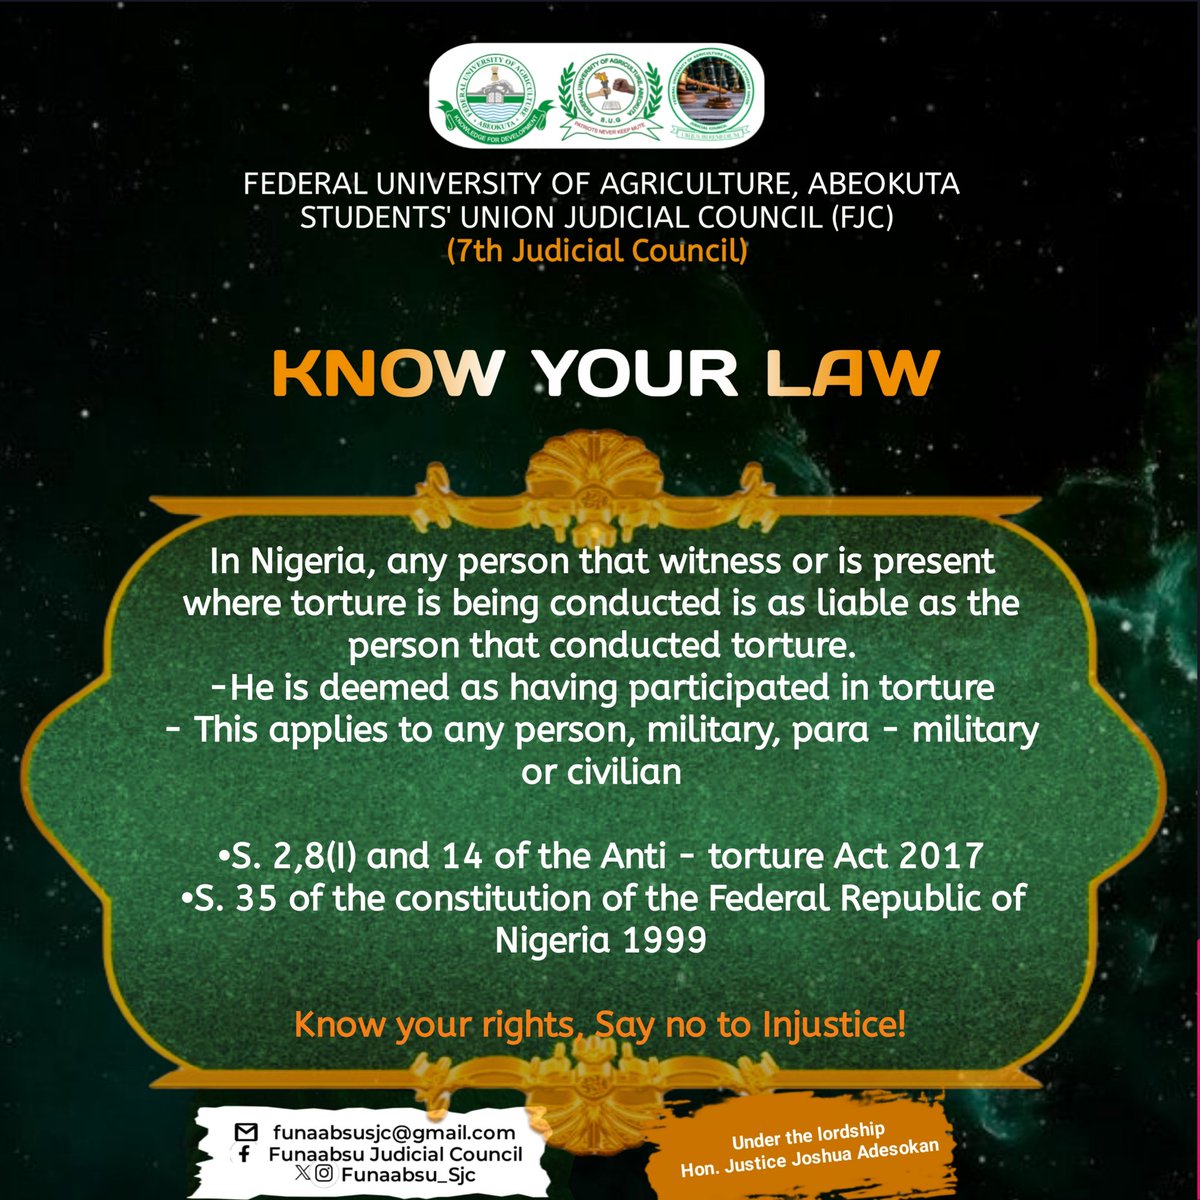 To live in a peaceful society where everyone can breathe an air of happiness, harboring any misconduct or a criminal can contribute to its distortion. *We are all stakeholders in justice*

#play_your_part
#KnowYourLaw
#7thFJC
#FUNAABSU23/24
#TeamUbuntu